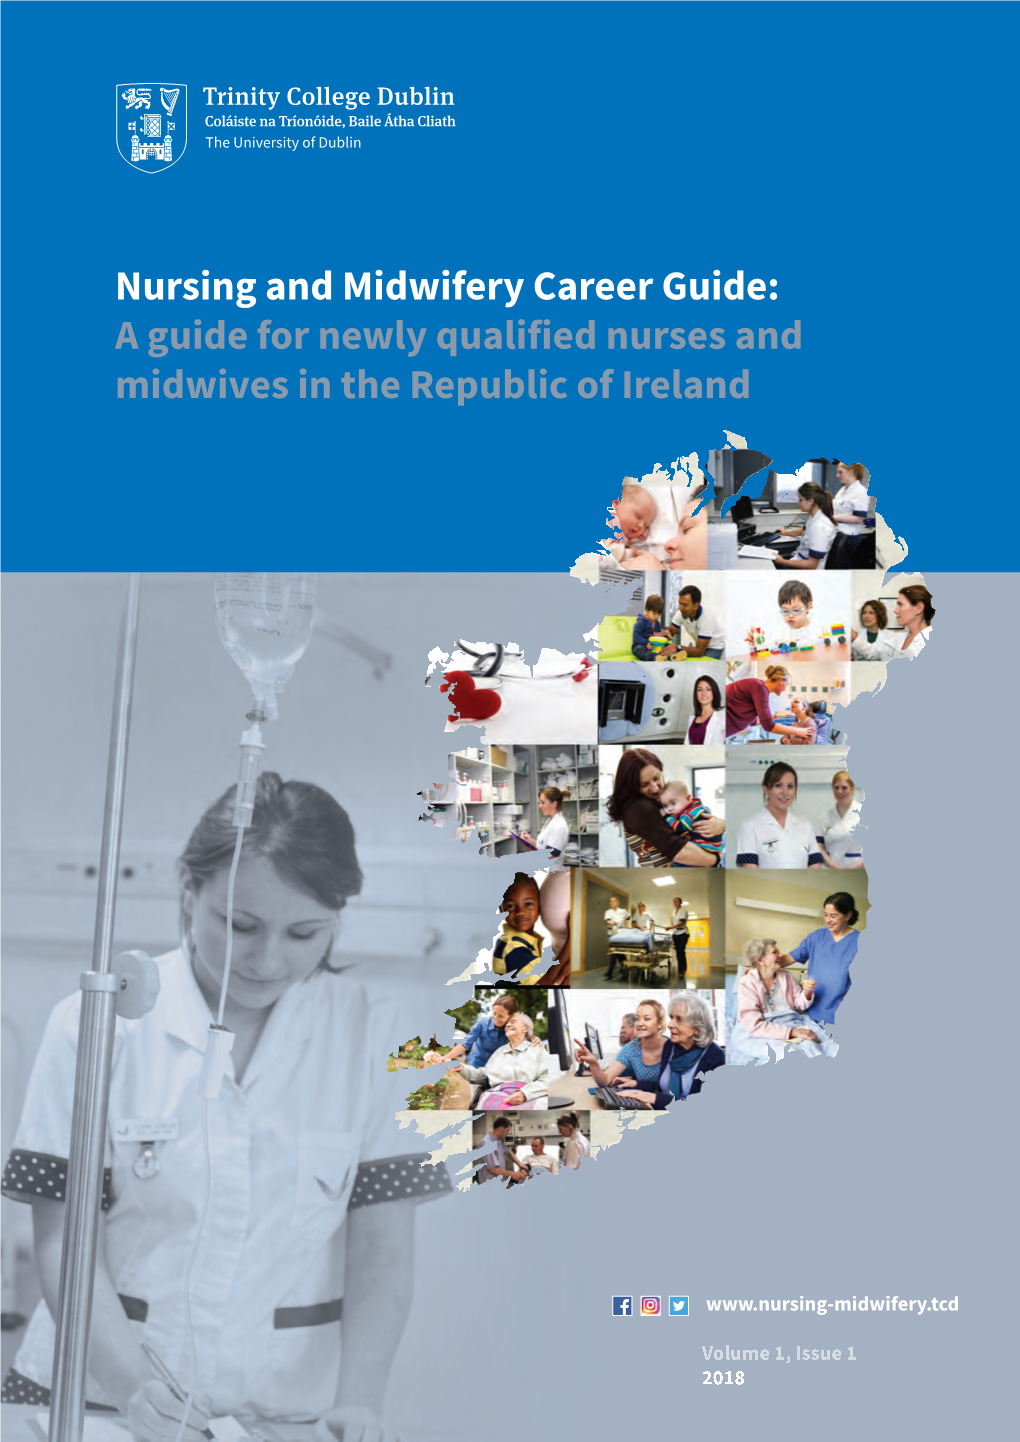 A Guide for Newly Qualified Nurses and Midwives in the Republic of Ireland